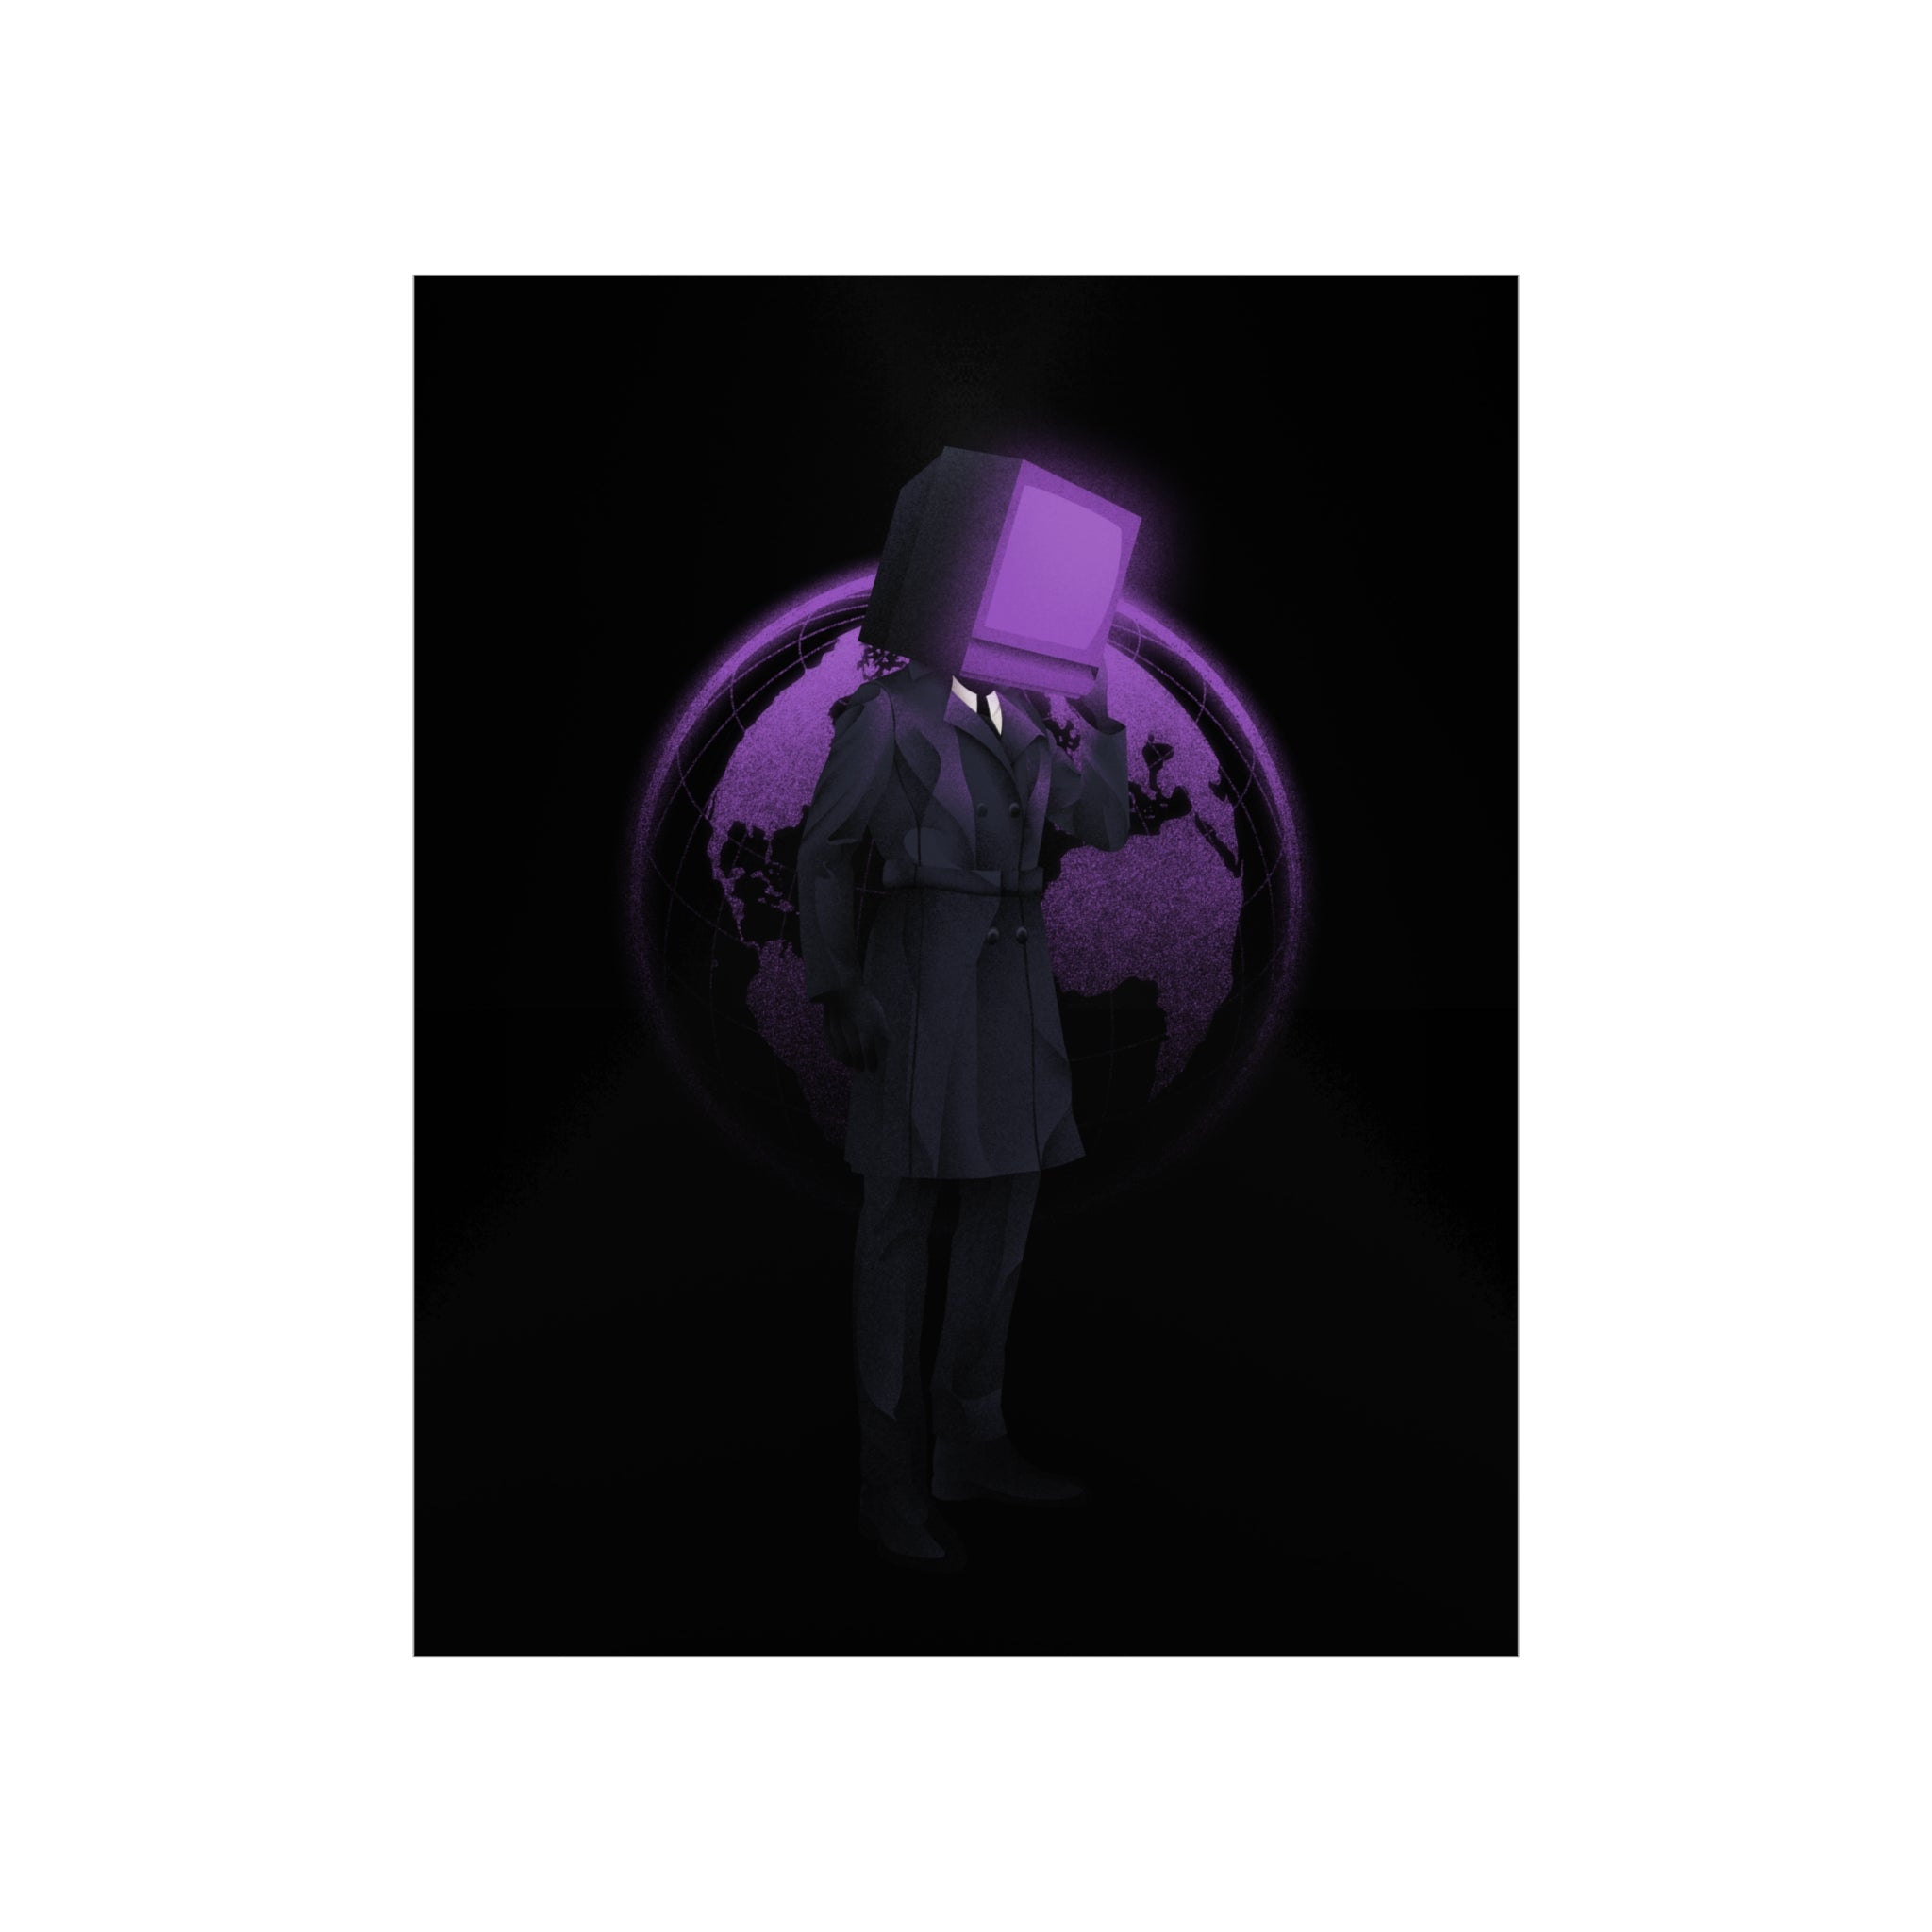 Matte poster of TV Man with a purple-tinted world